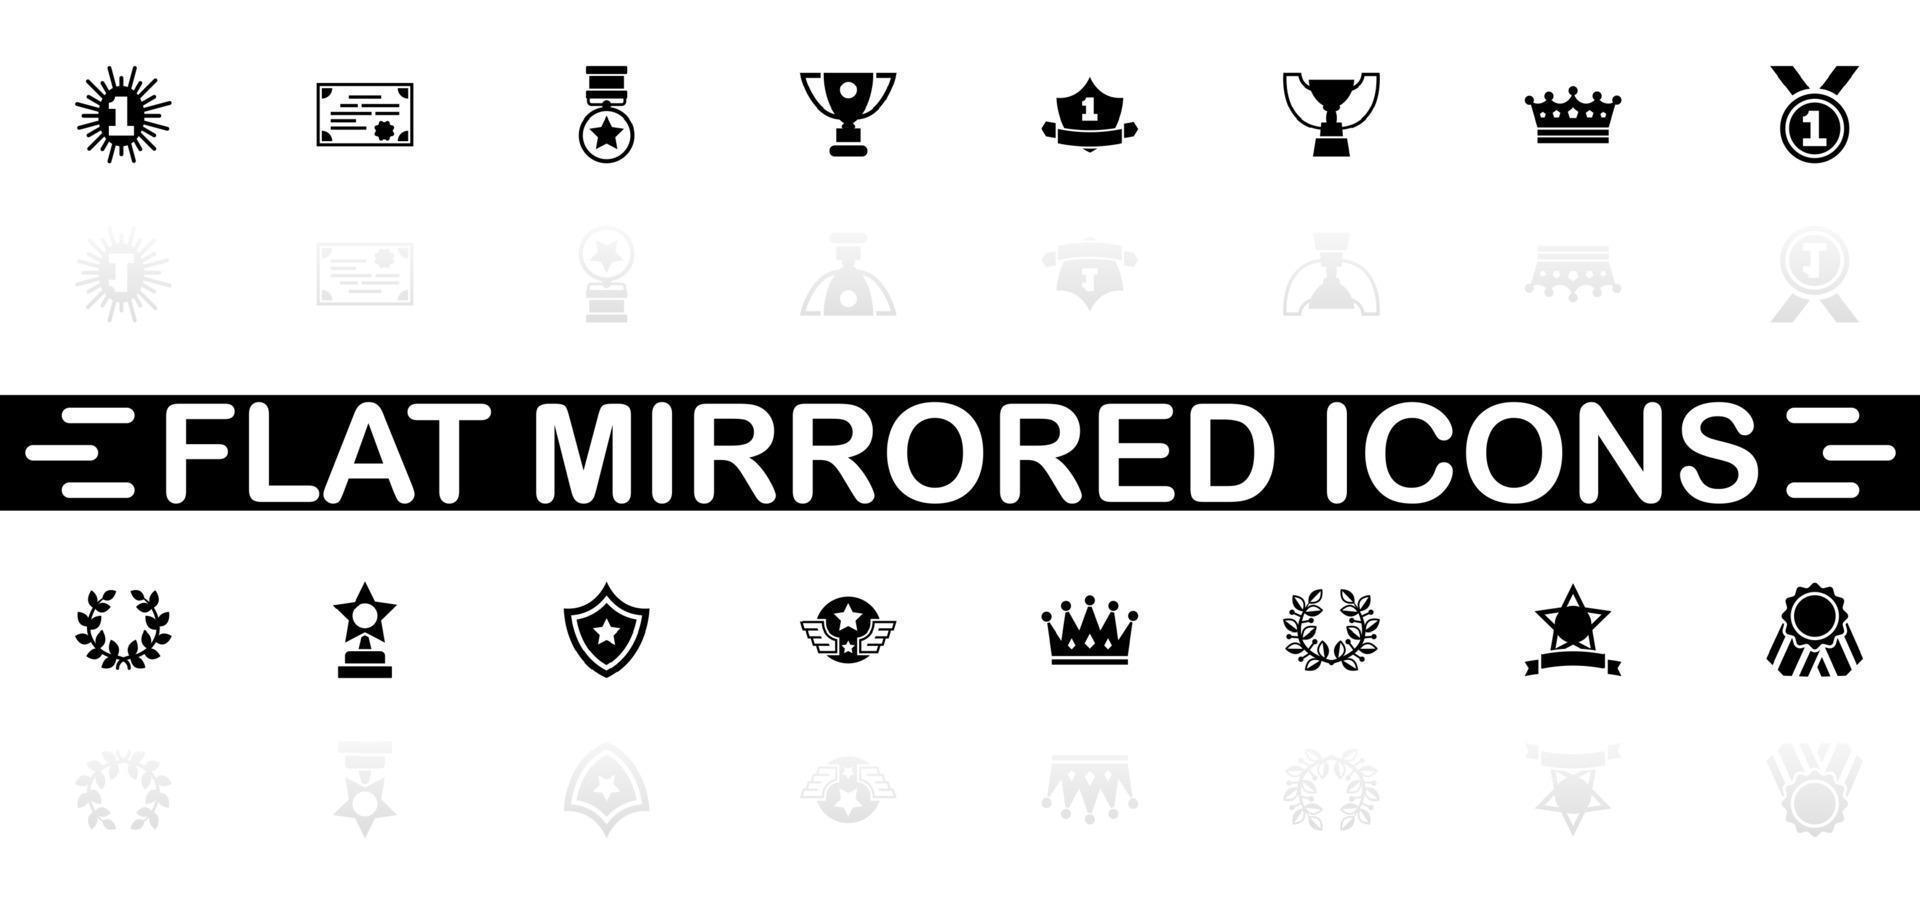 Awards icons - Black symbol on white background. Simple illustration. Flat Vector Icon. Mirror Reflection Shadow. Can be used in logo, web, mobile and UI UX project.